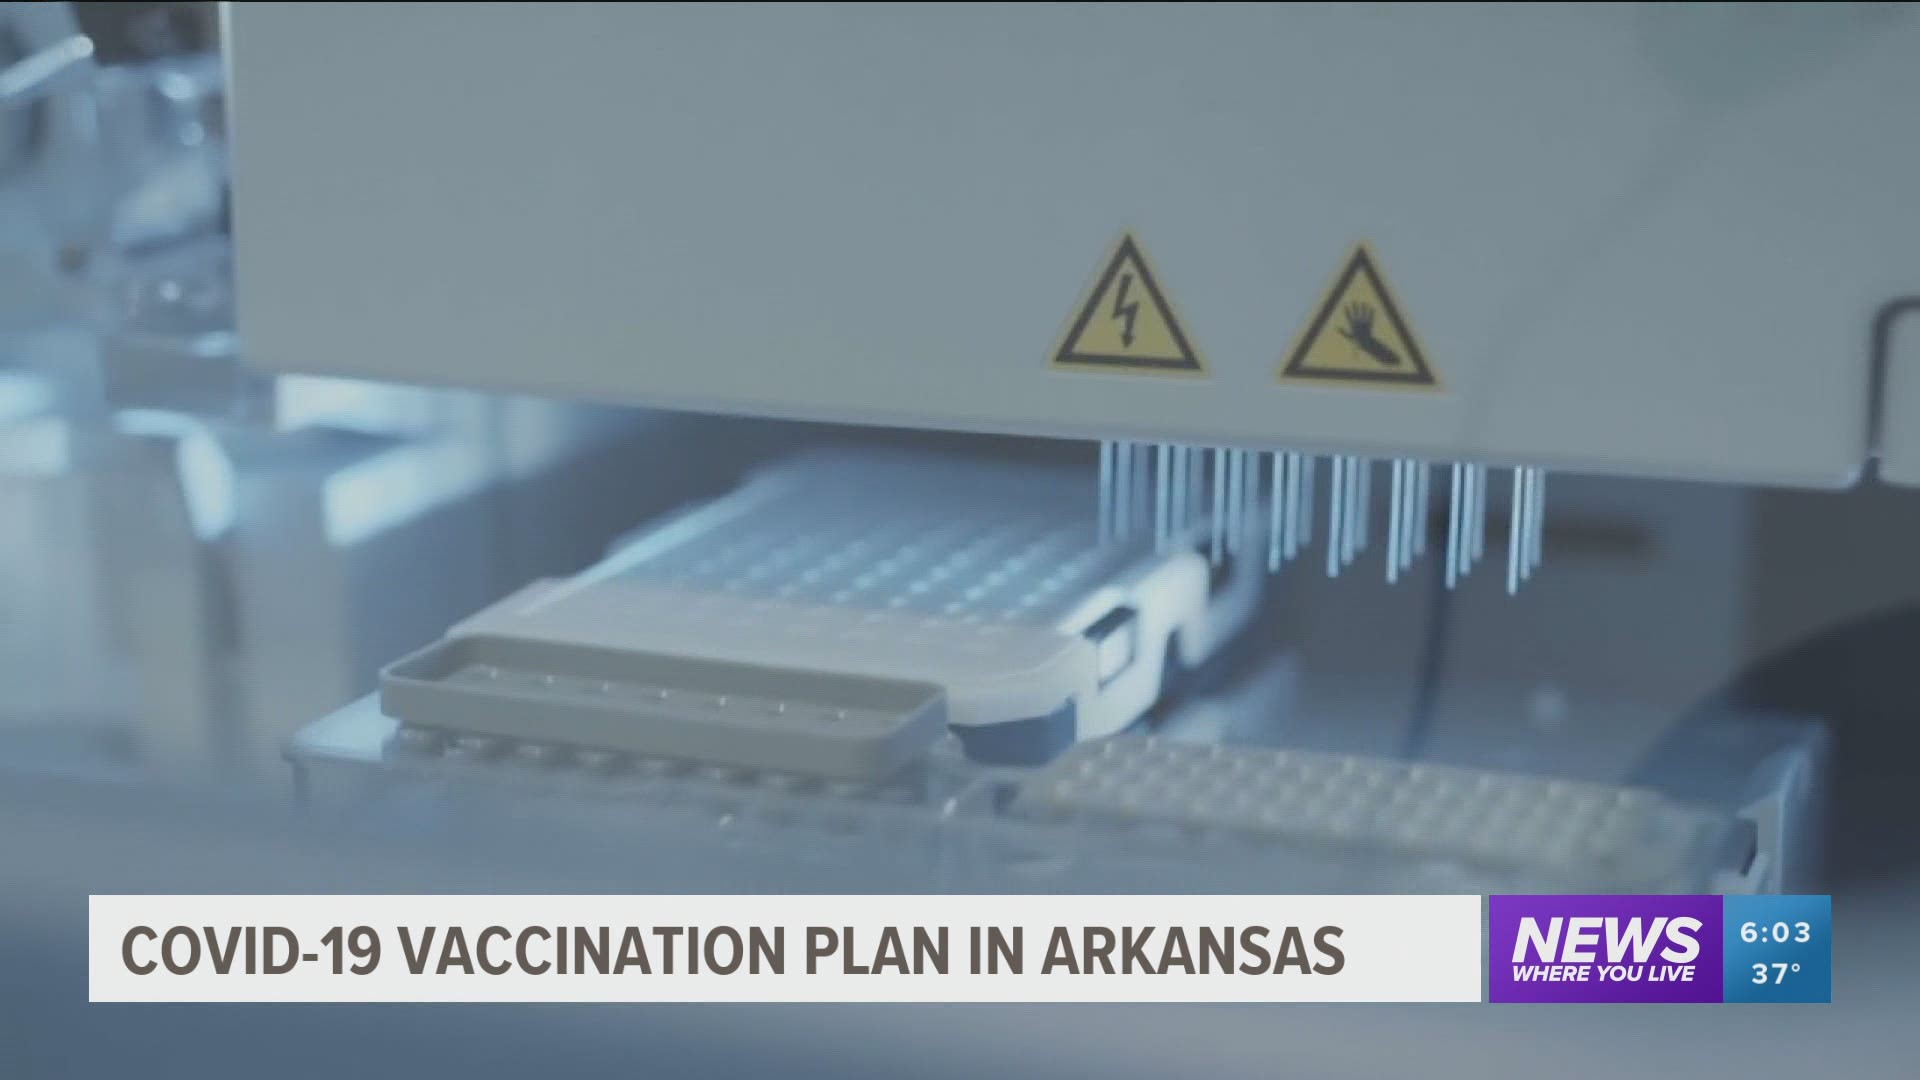 Dr. José Romero and state legislators addressed several issues regarding the COVID-19 pandemic and vaccine in Arkansas. https://bit.ly/33yo1G1